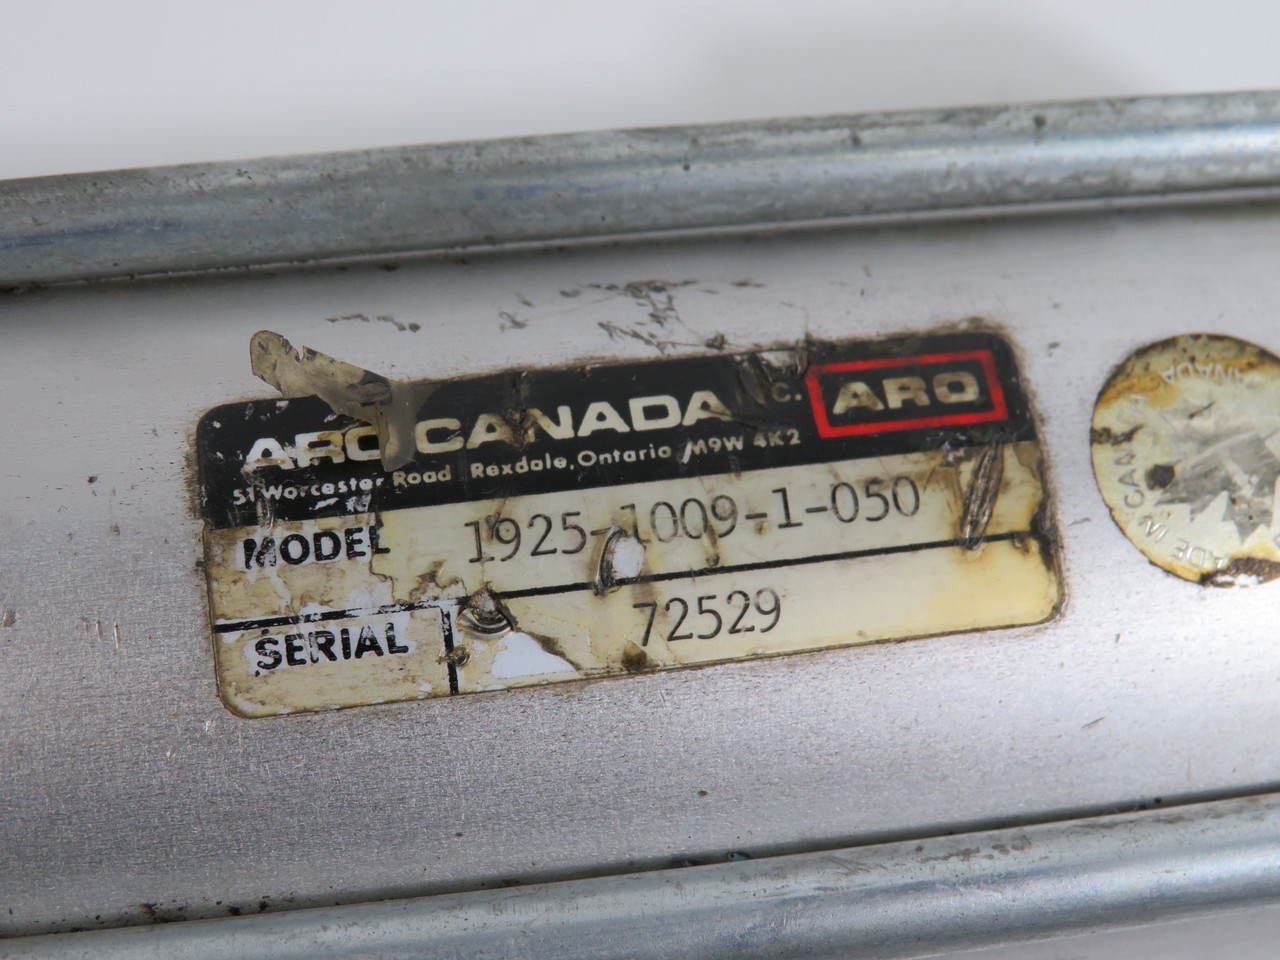 Aro Canada 1925-1009-1-1050 Pneumatic Cylinder Modified Shaft End USED